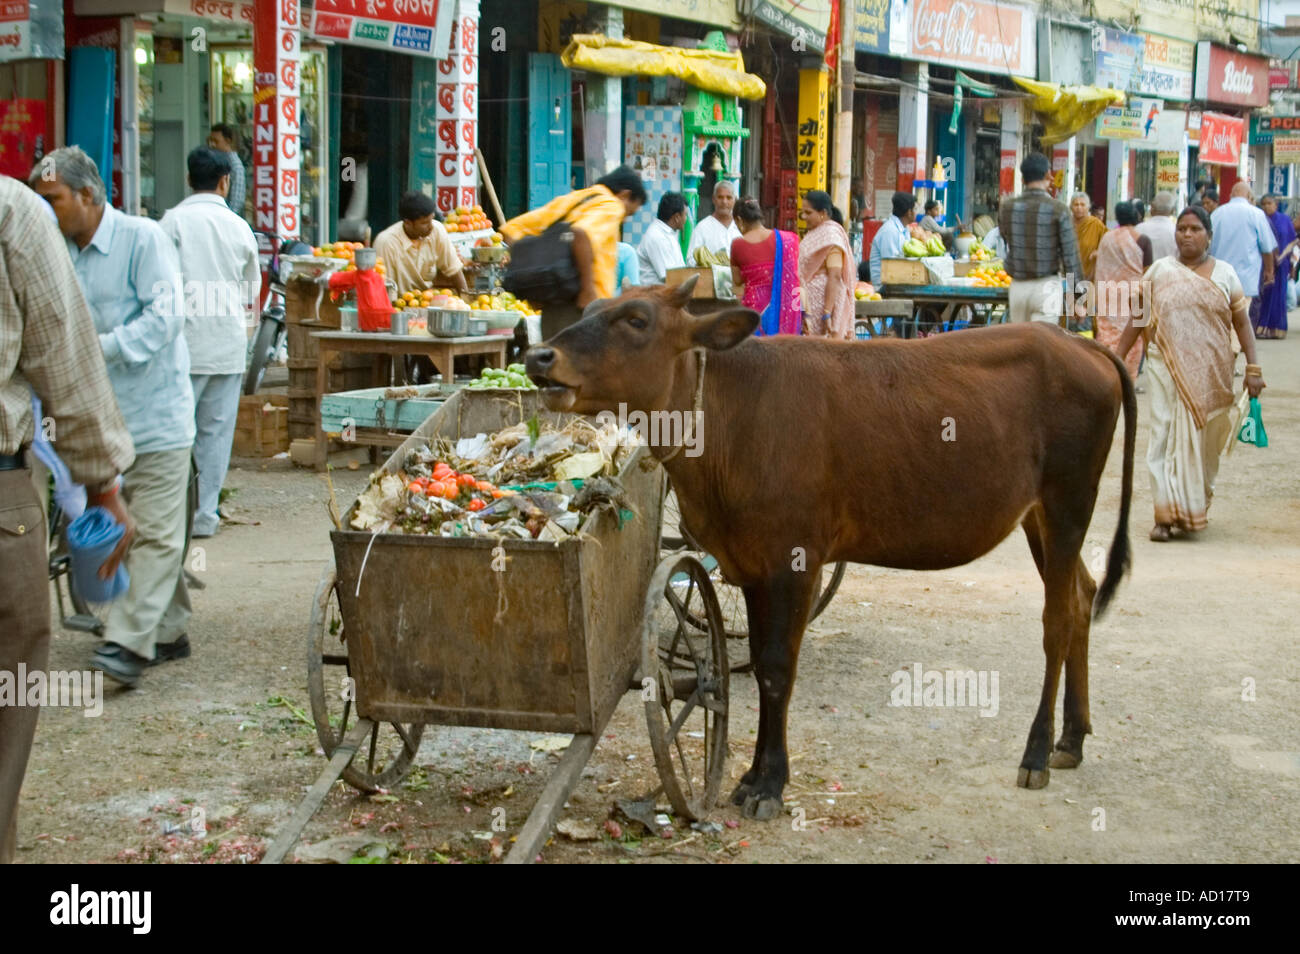 Horizontal wide angle of a typical streetscene in India with a sacred cow eating rubbish from a hand cart. Stock Photo